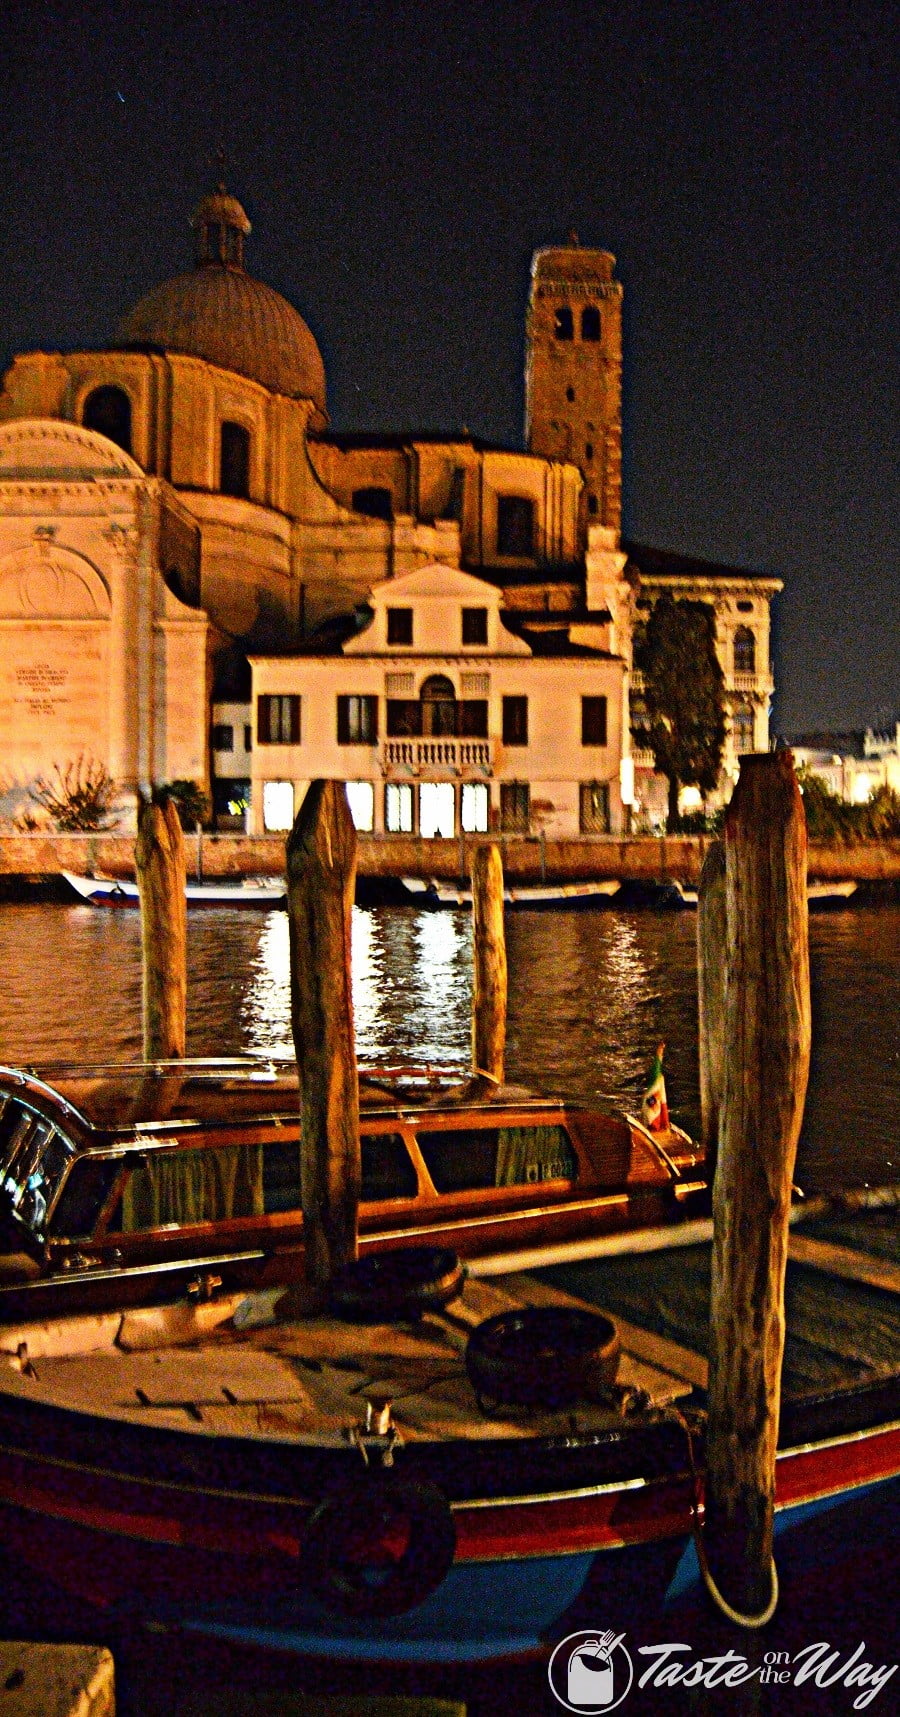 One of the top 10 fun #ThingsToDo in #Venice, #Italy is to discover the night life. Check out for more! #travel #photography @tasteontheway